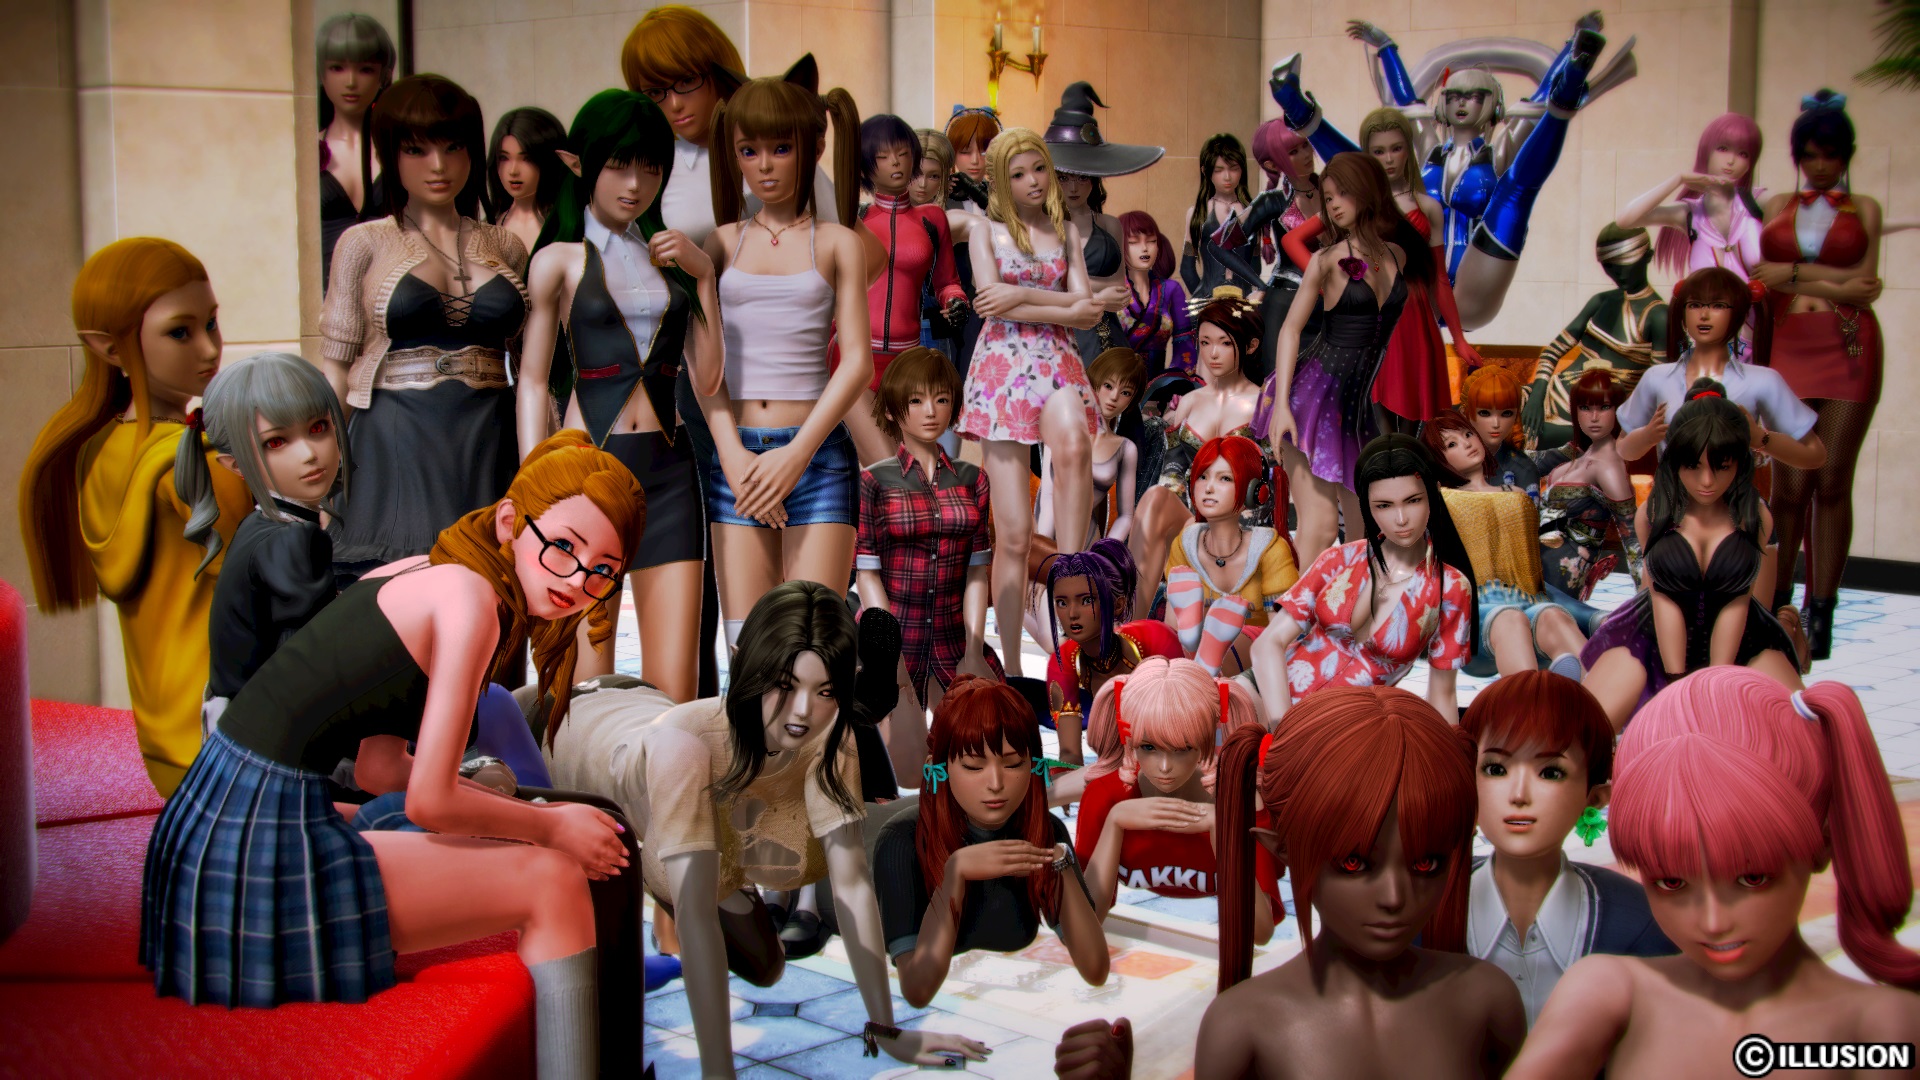 cady nguyen recommends honey select first person pic